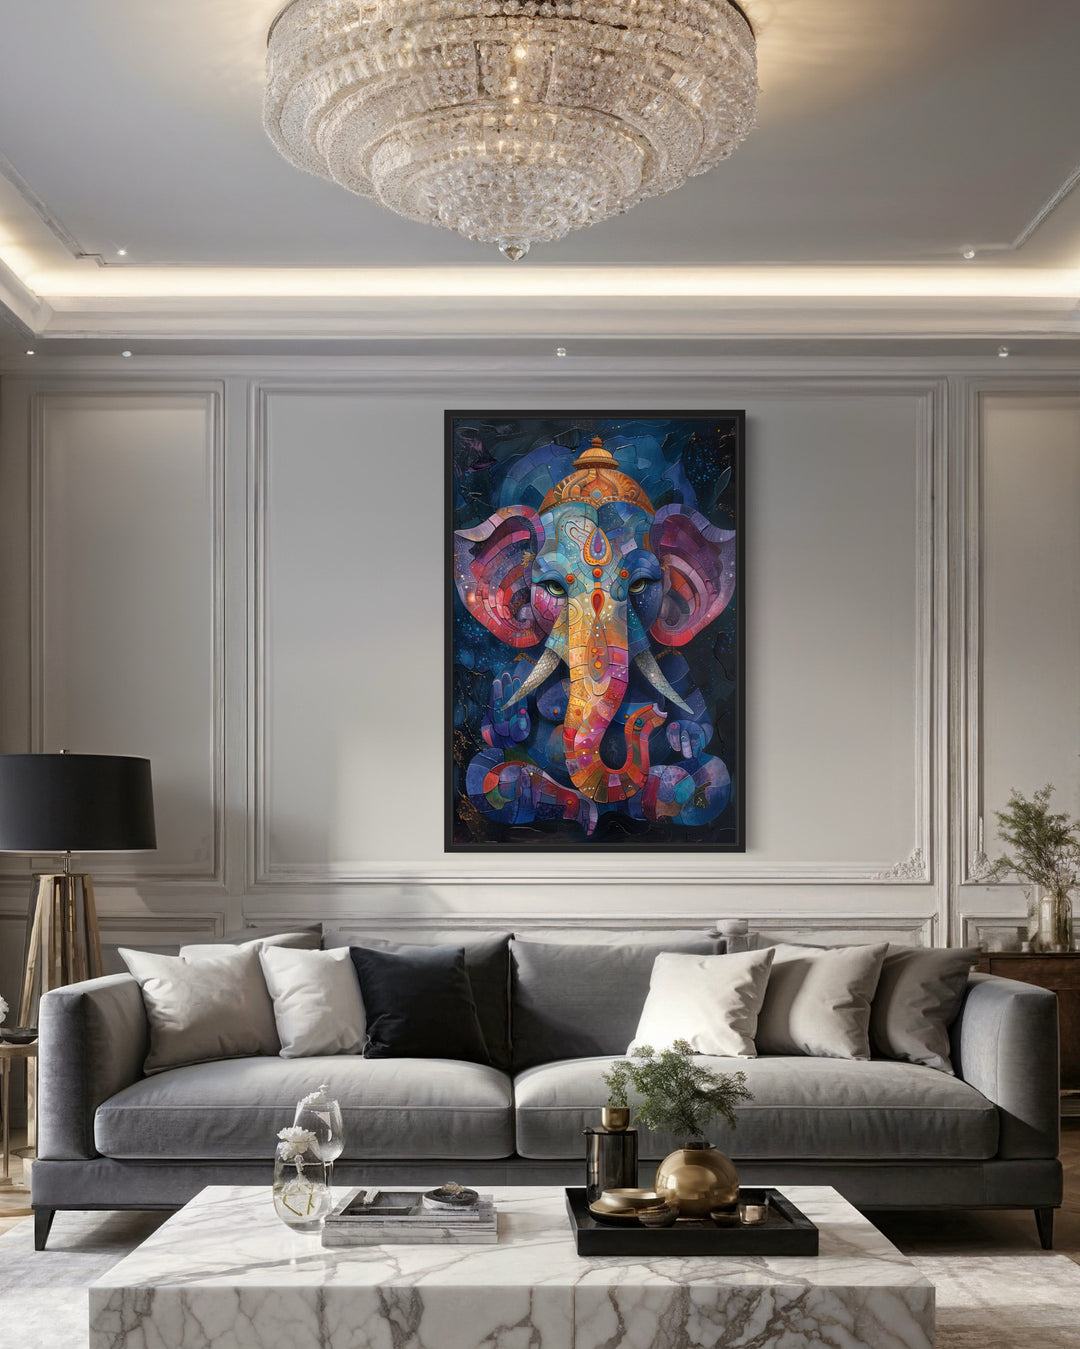 Colorful Modern Lord Ganesha Framed Canvas Wall Art in living room